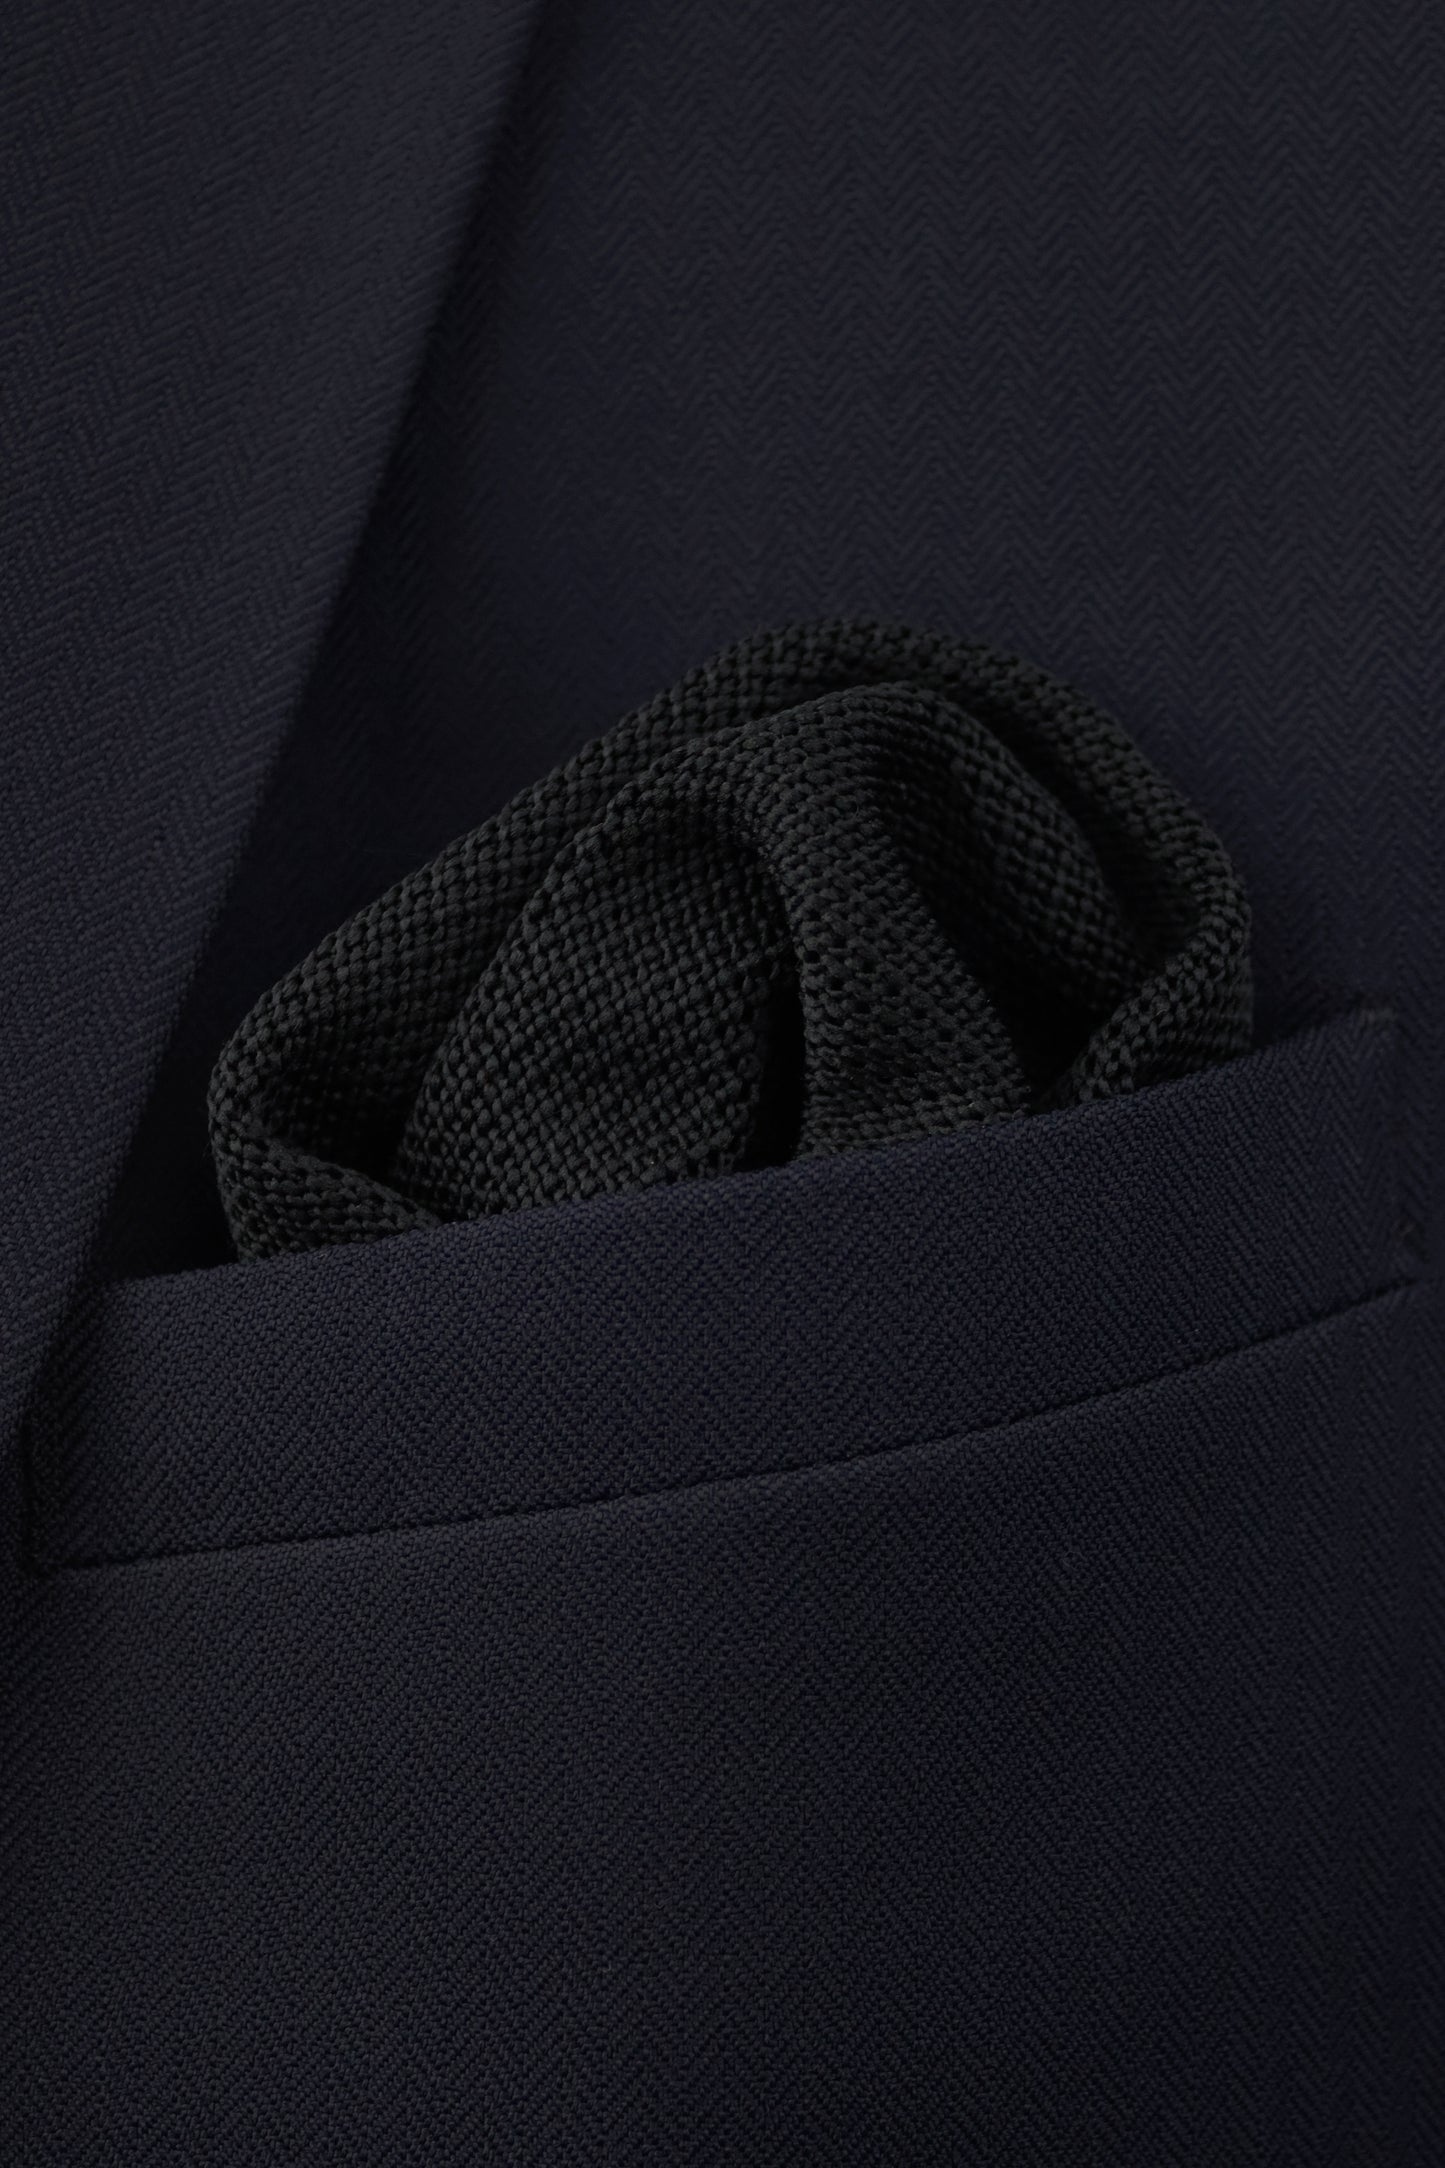 100% Polyester Diamond End Knitted Tie - Black